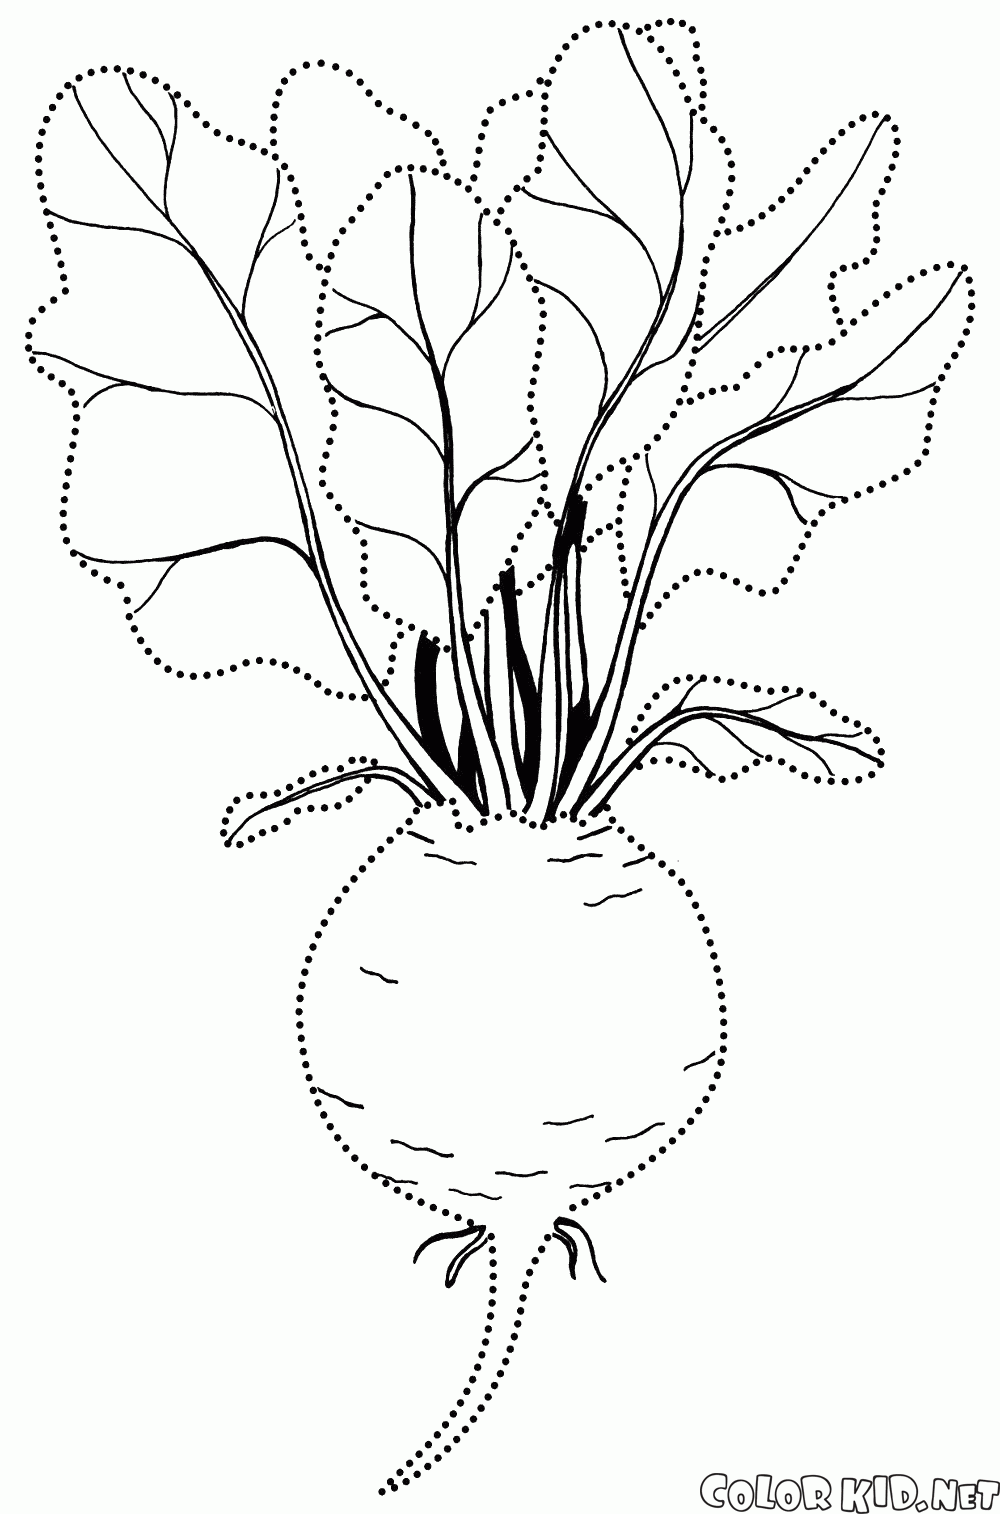 Coloring page - Vegetables